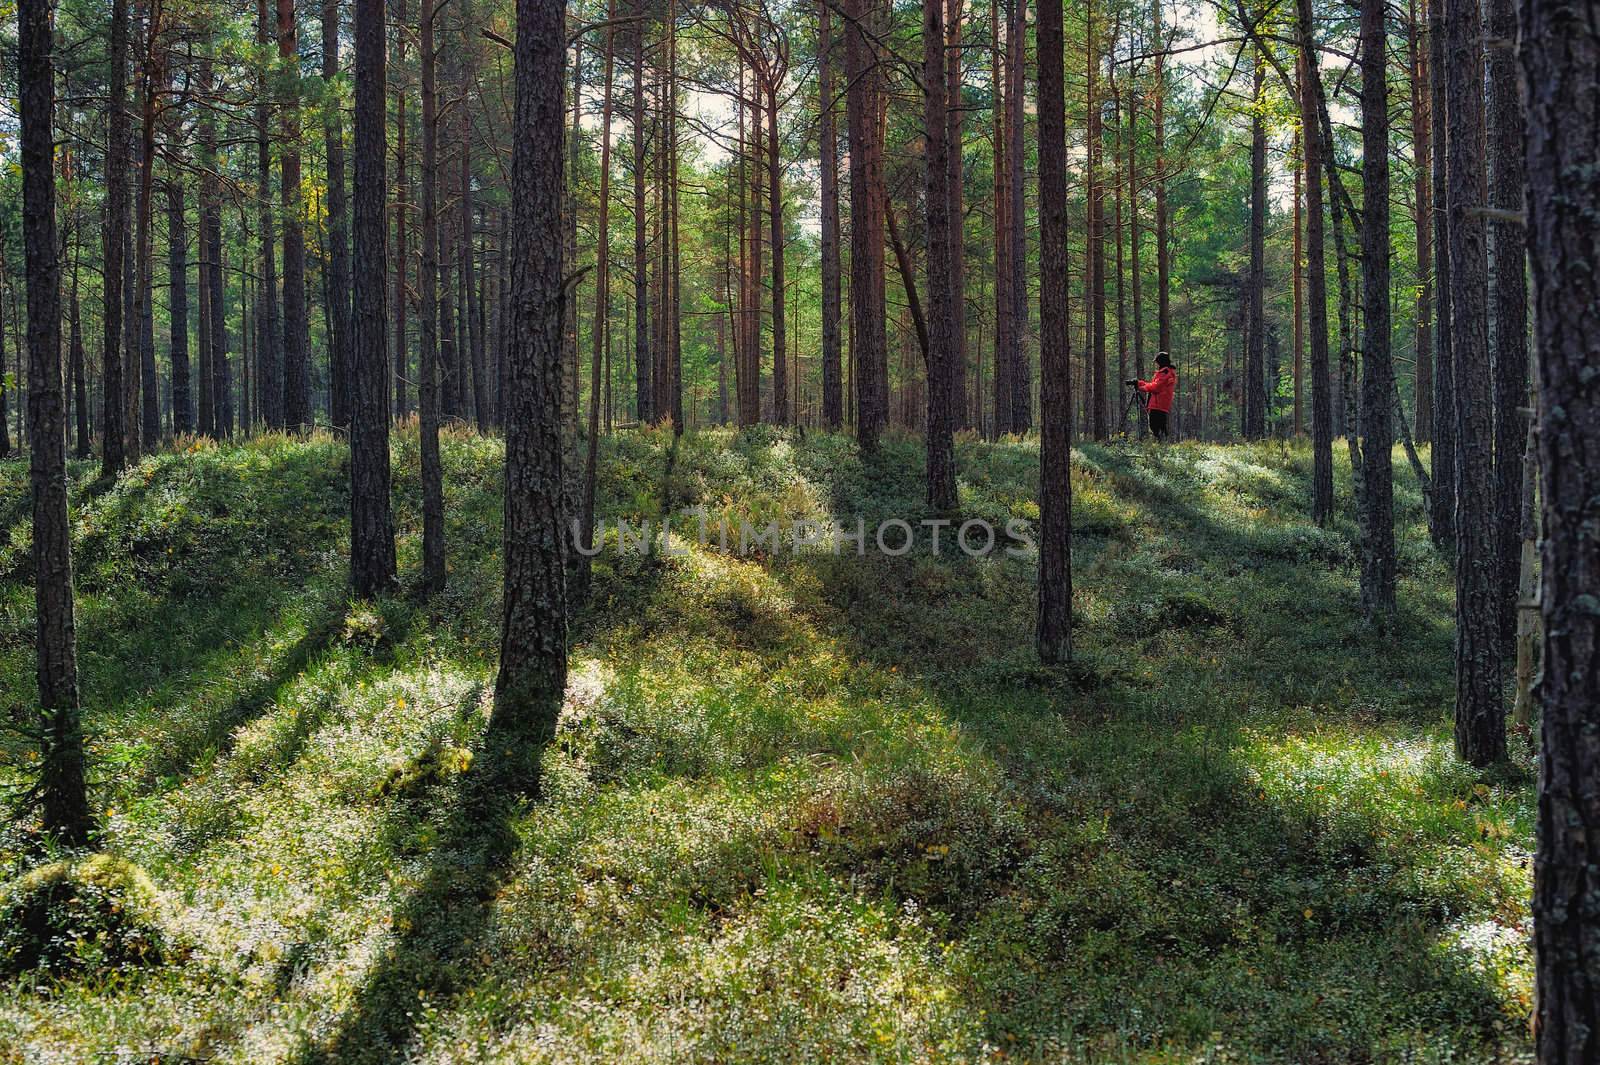 Majestic forest. High trunks of pines overgrown with moss